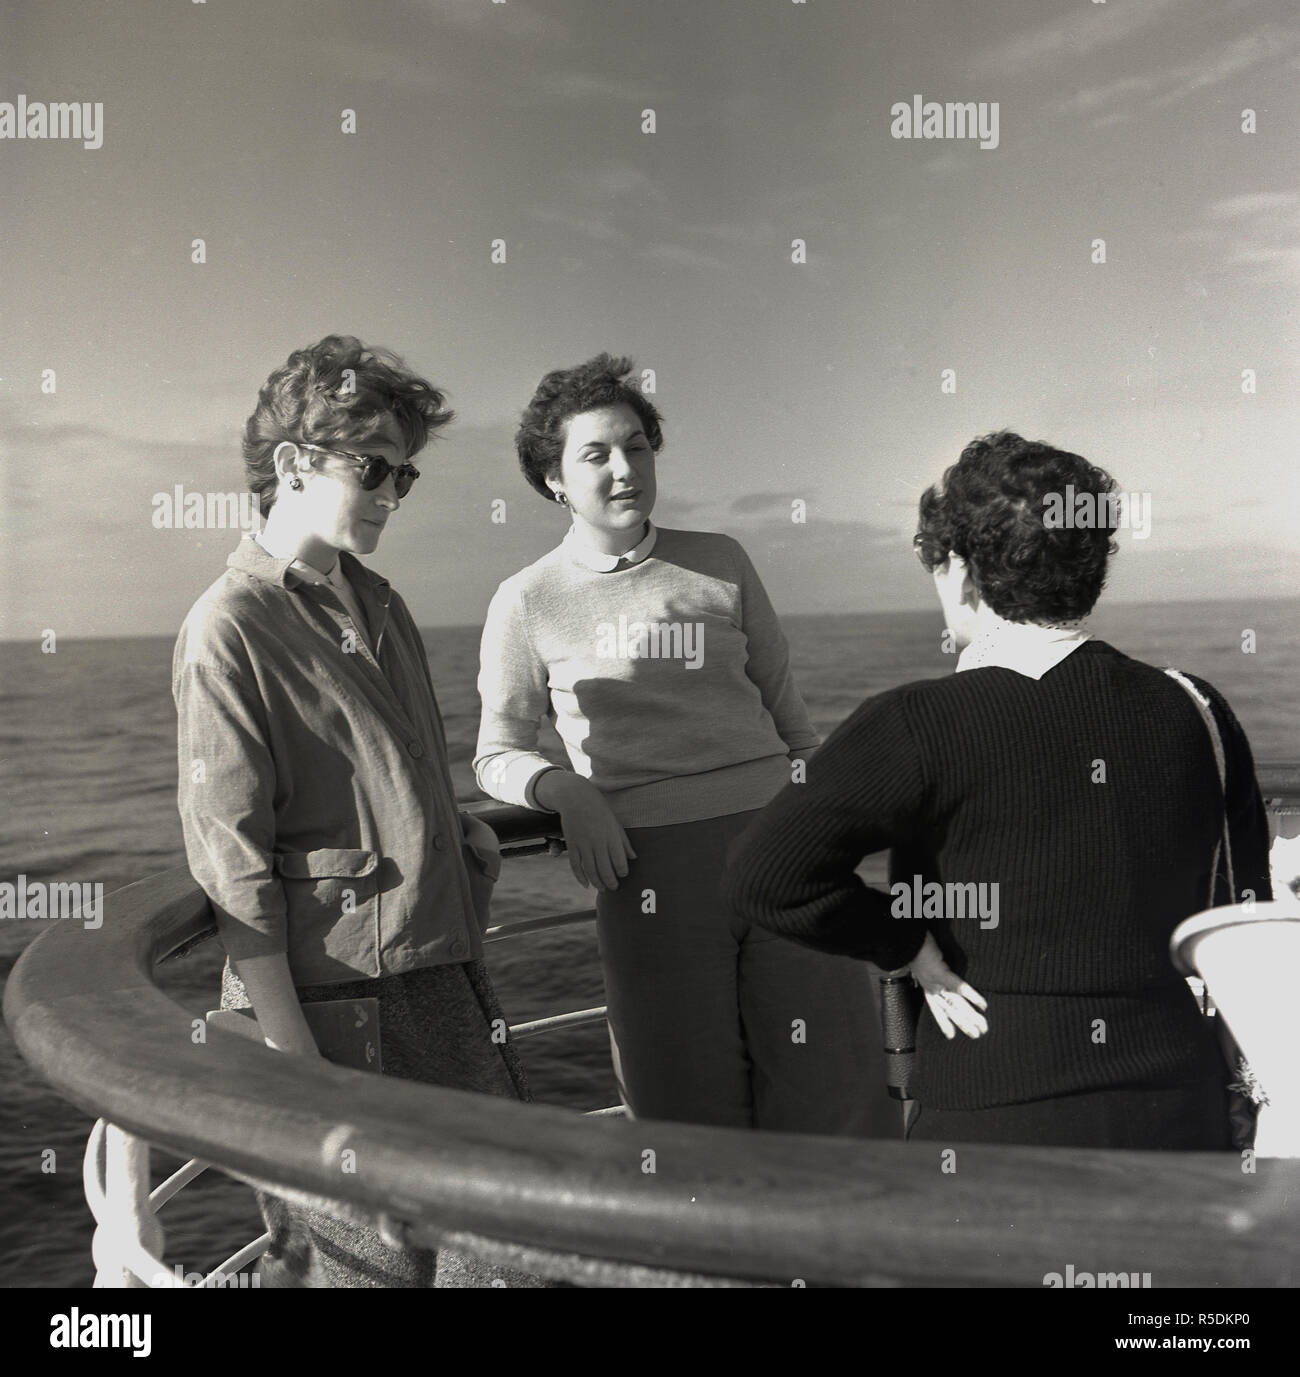 1960, mid-ocean and on a union-castle steamship headed for the Cape in South Africa, two young women have a discussion with an older female traveller in a corner of the ship's outer deck. Stock Photo